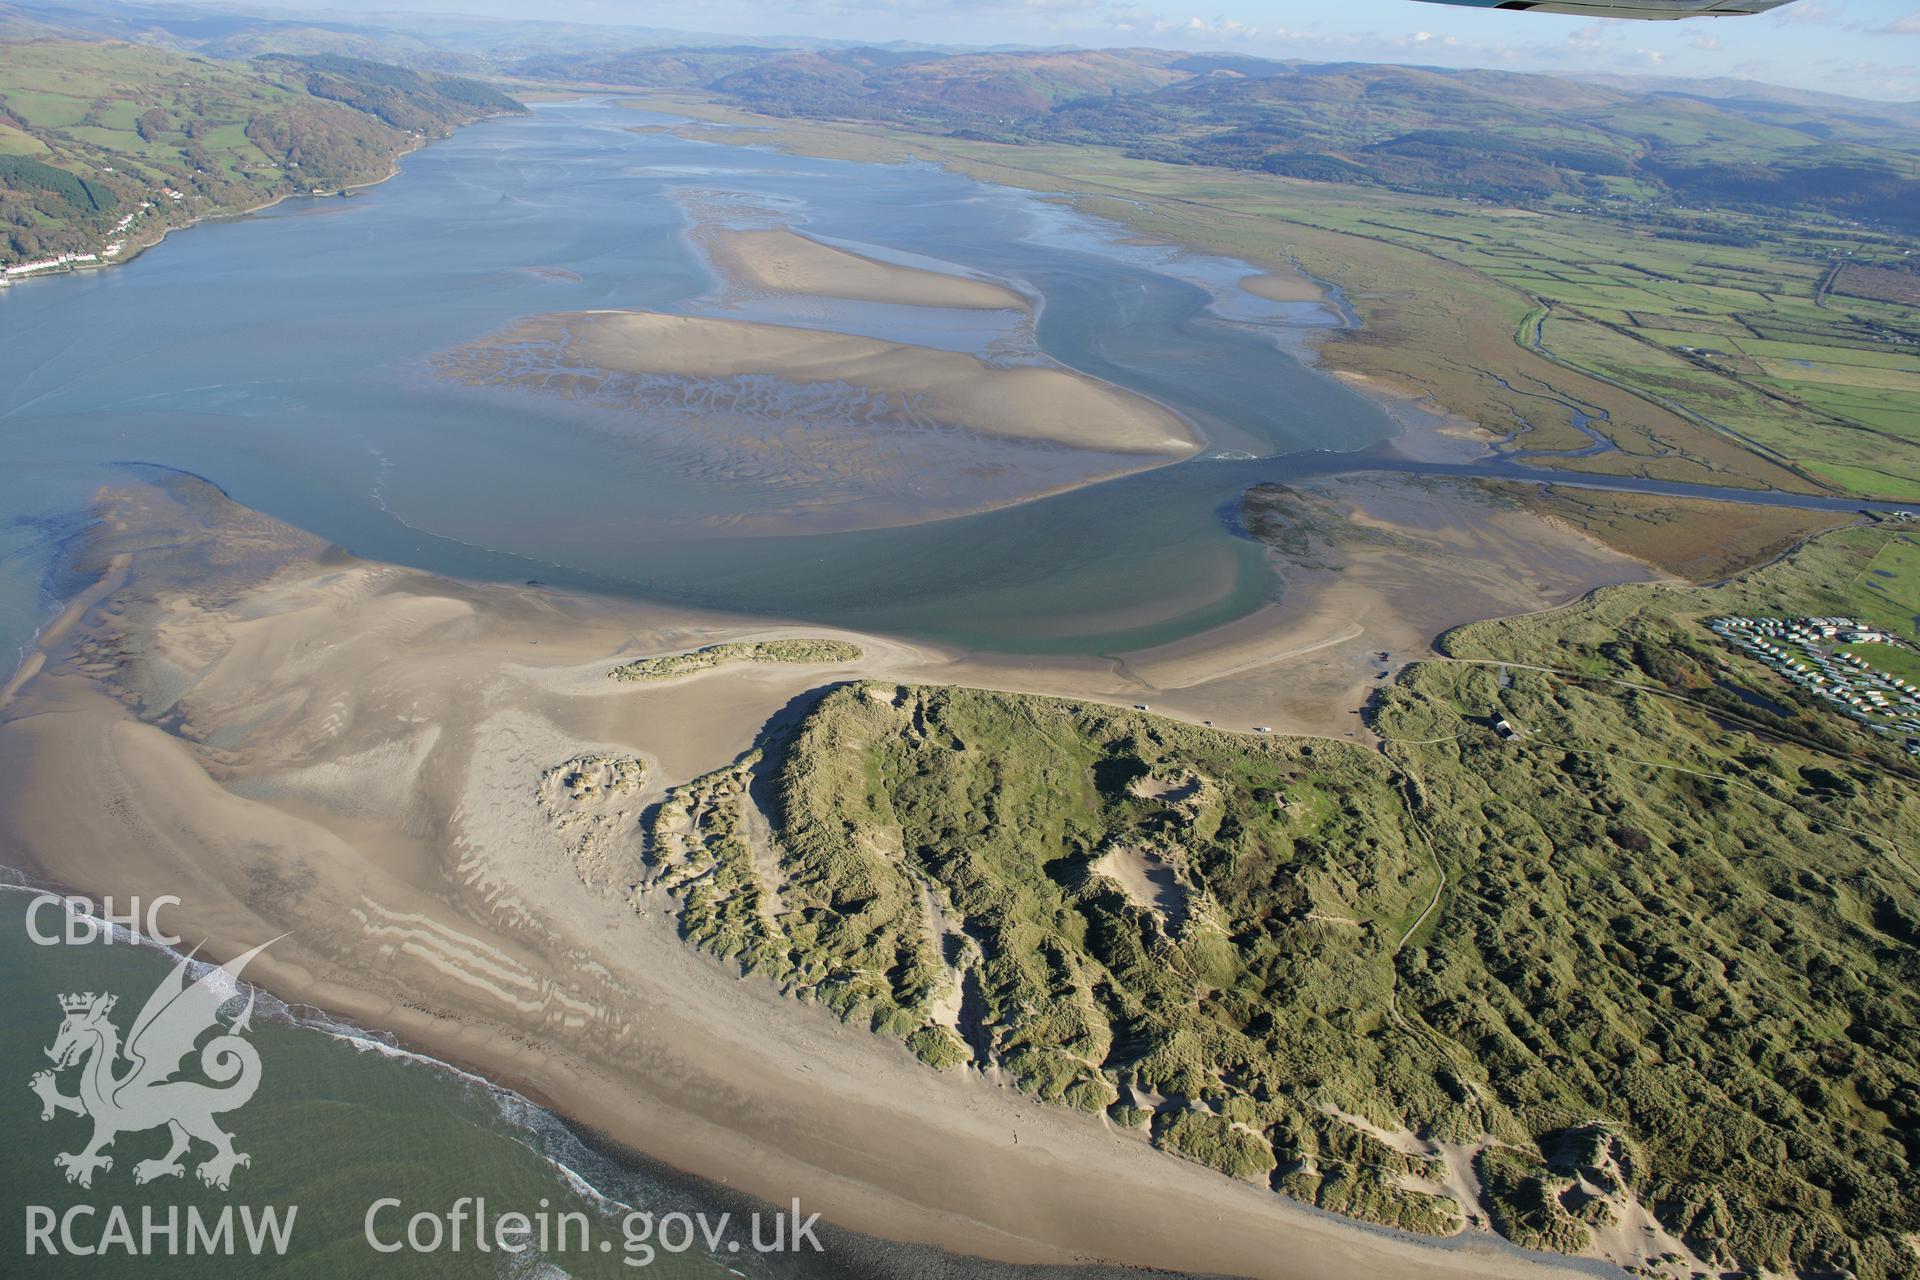 RCAHMW colour oblique photograph of Ynyslas National Nature Reserve. Taken by Toby Driver on 05/11/2012.